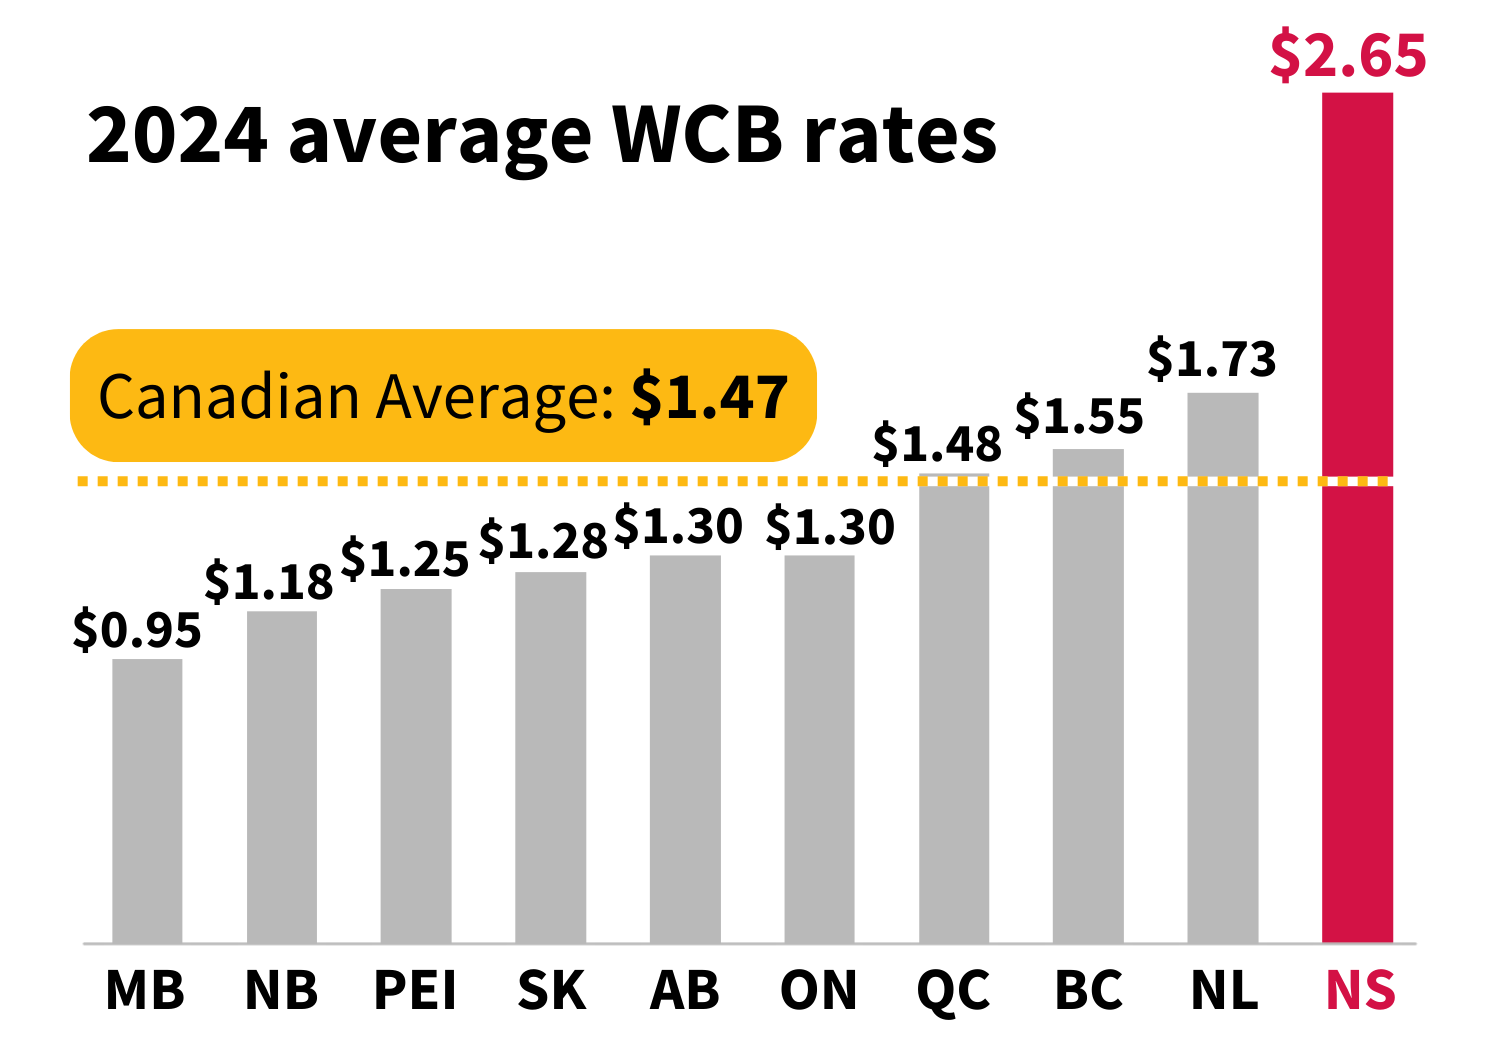 In this graphic, we can see the 2024 average WCB rates (for NS, it is $2.65, which is much higher than the national average, resting at $1.47).